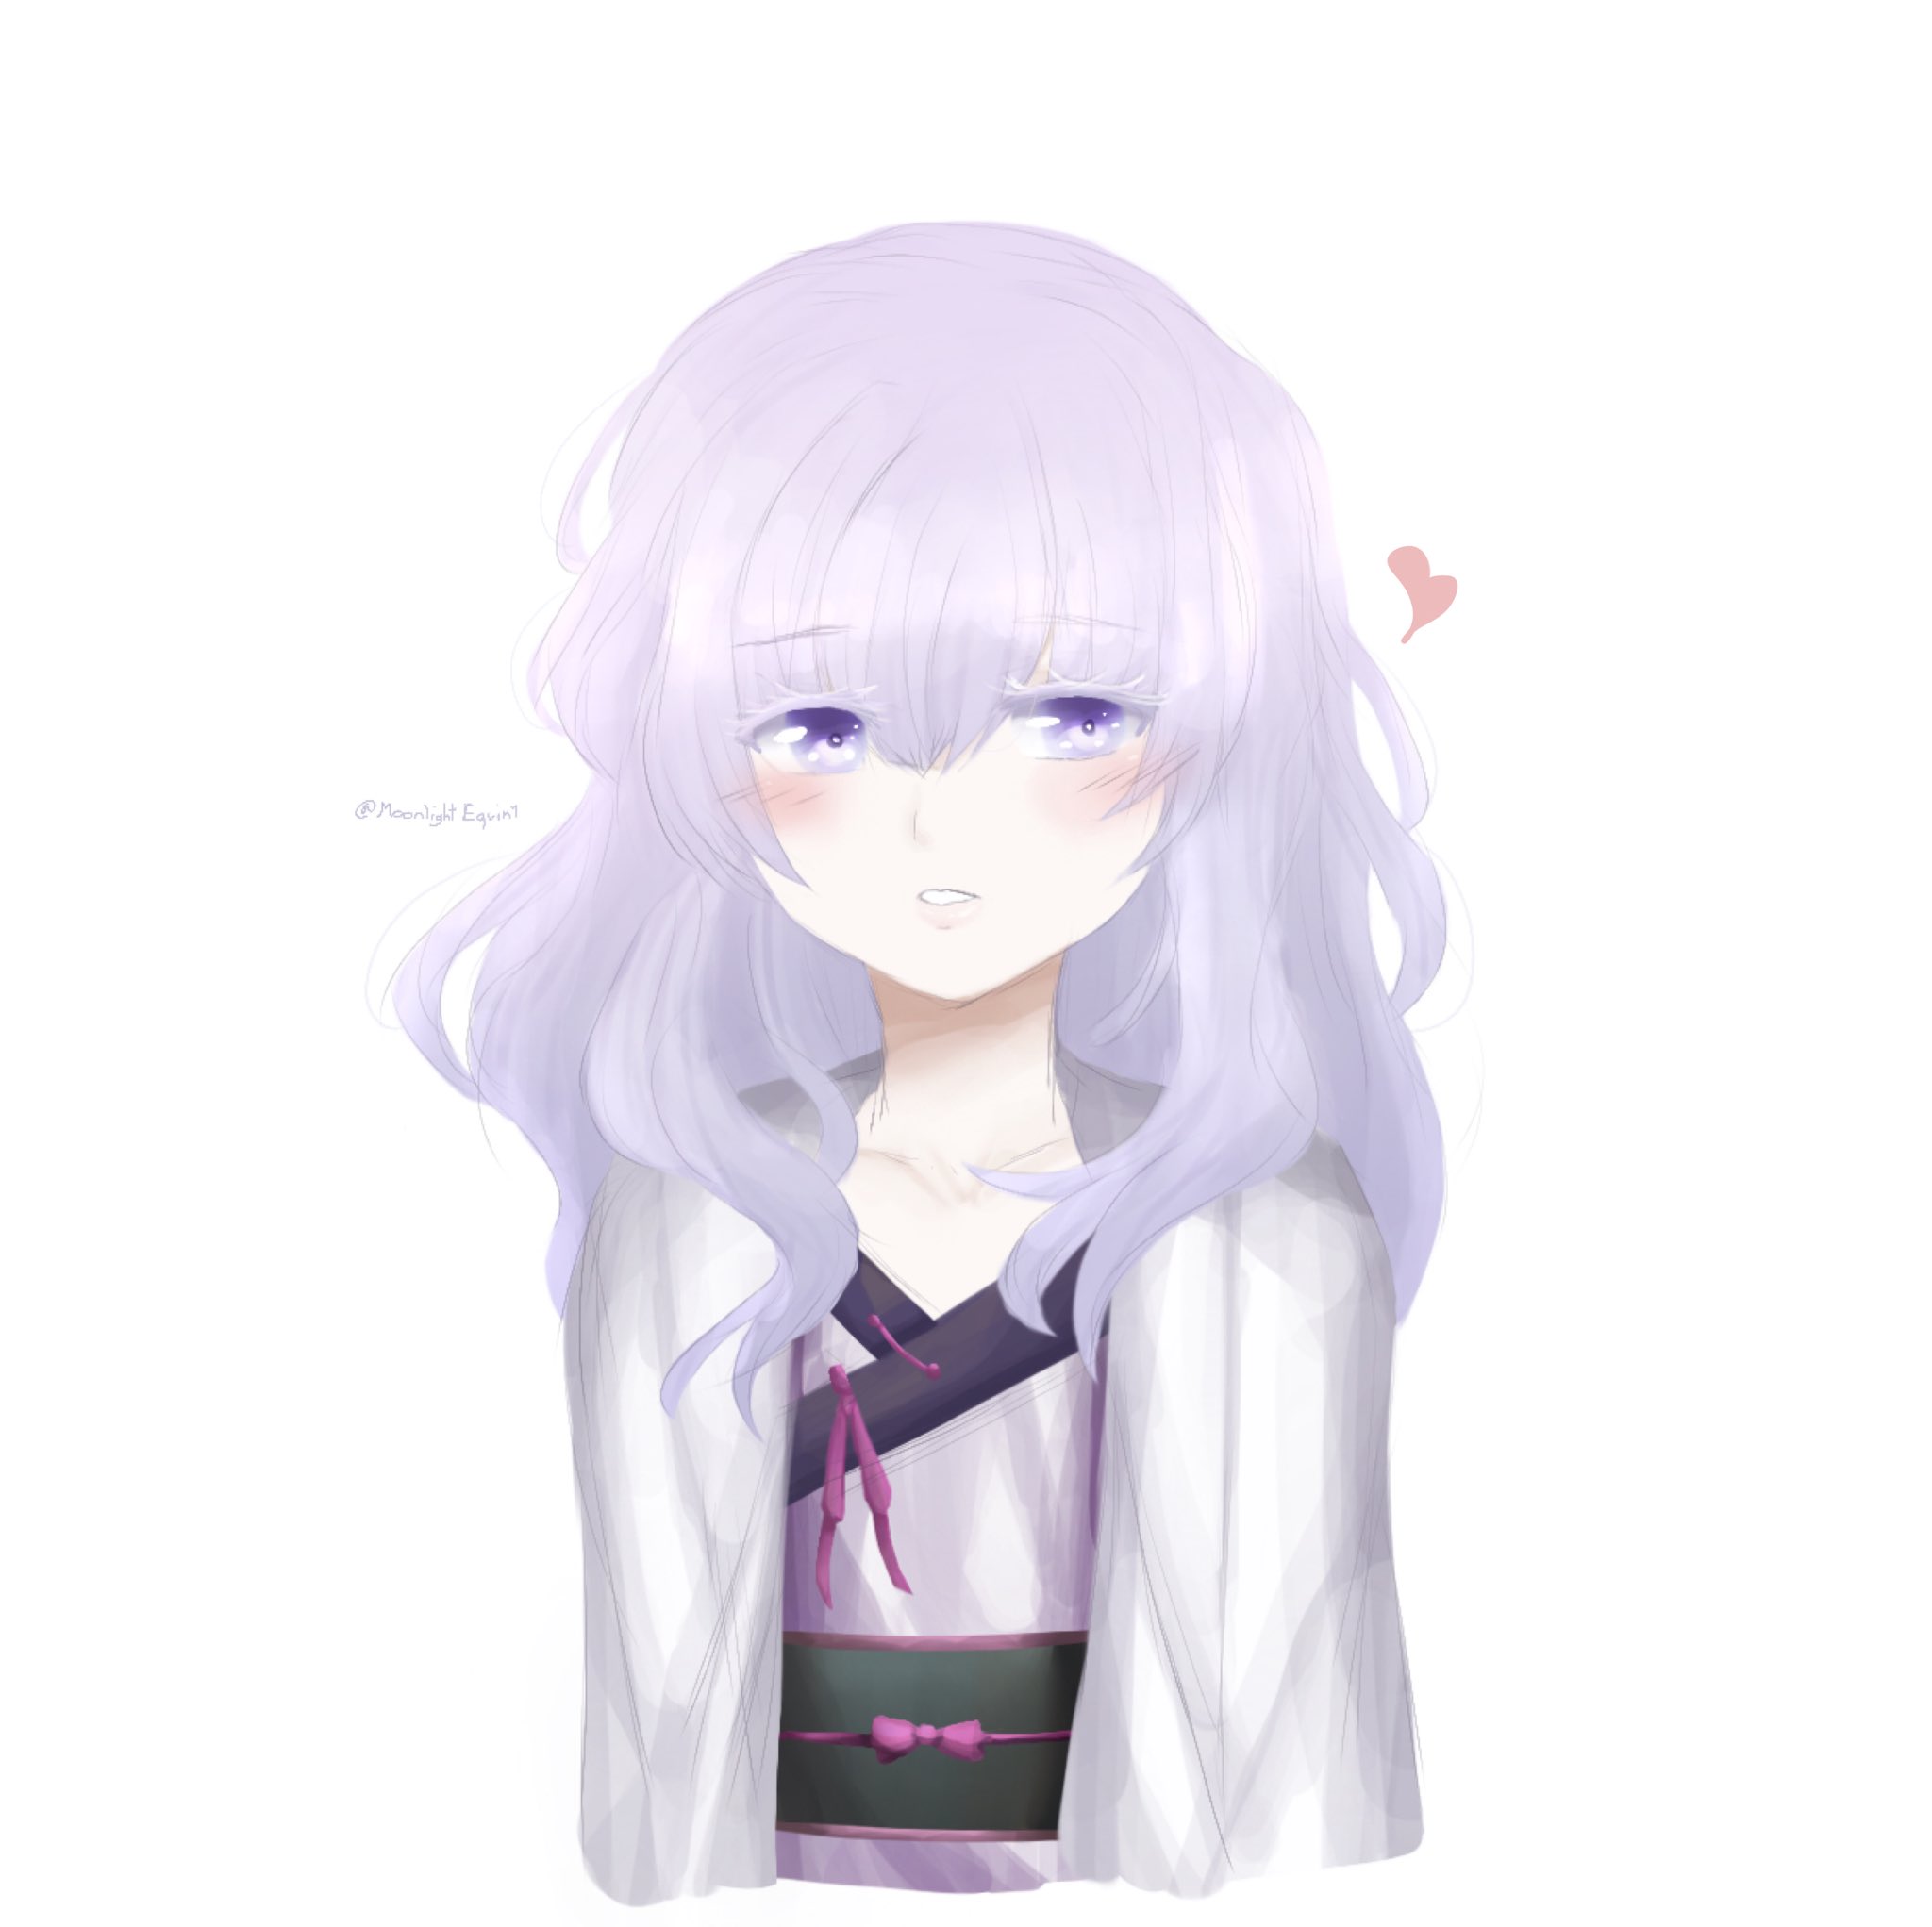 Just Ray So I Drew Nanami In Her Child Form Listen I Love Her She S So Adorable Norn9 ノルンノネット Shiranuinanami 不知火七海 Otometwt Fanart Art21 Digitalart Hope Twitter Crop Doesn T